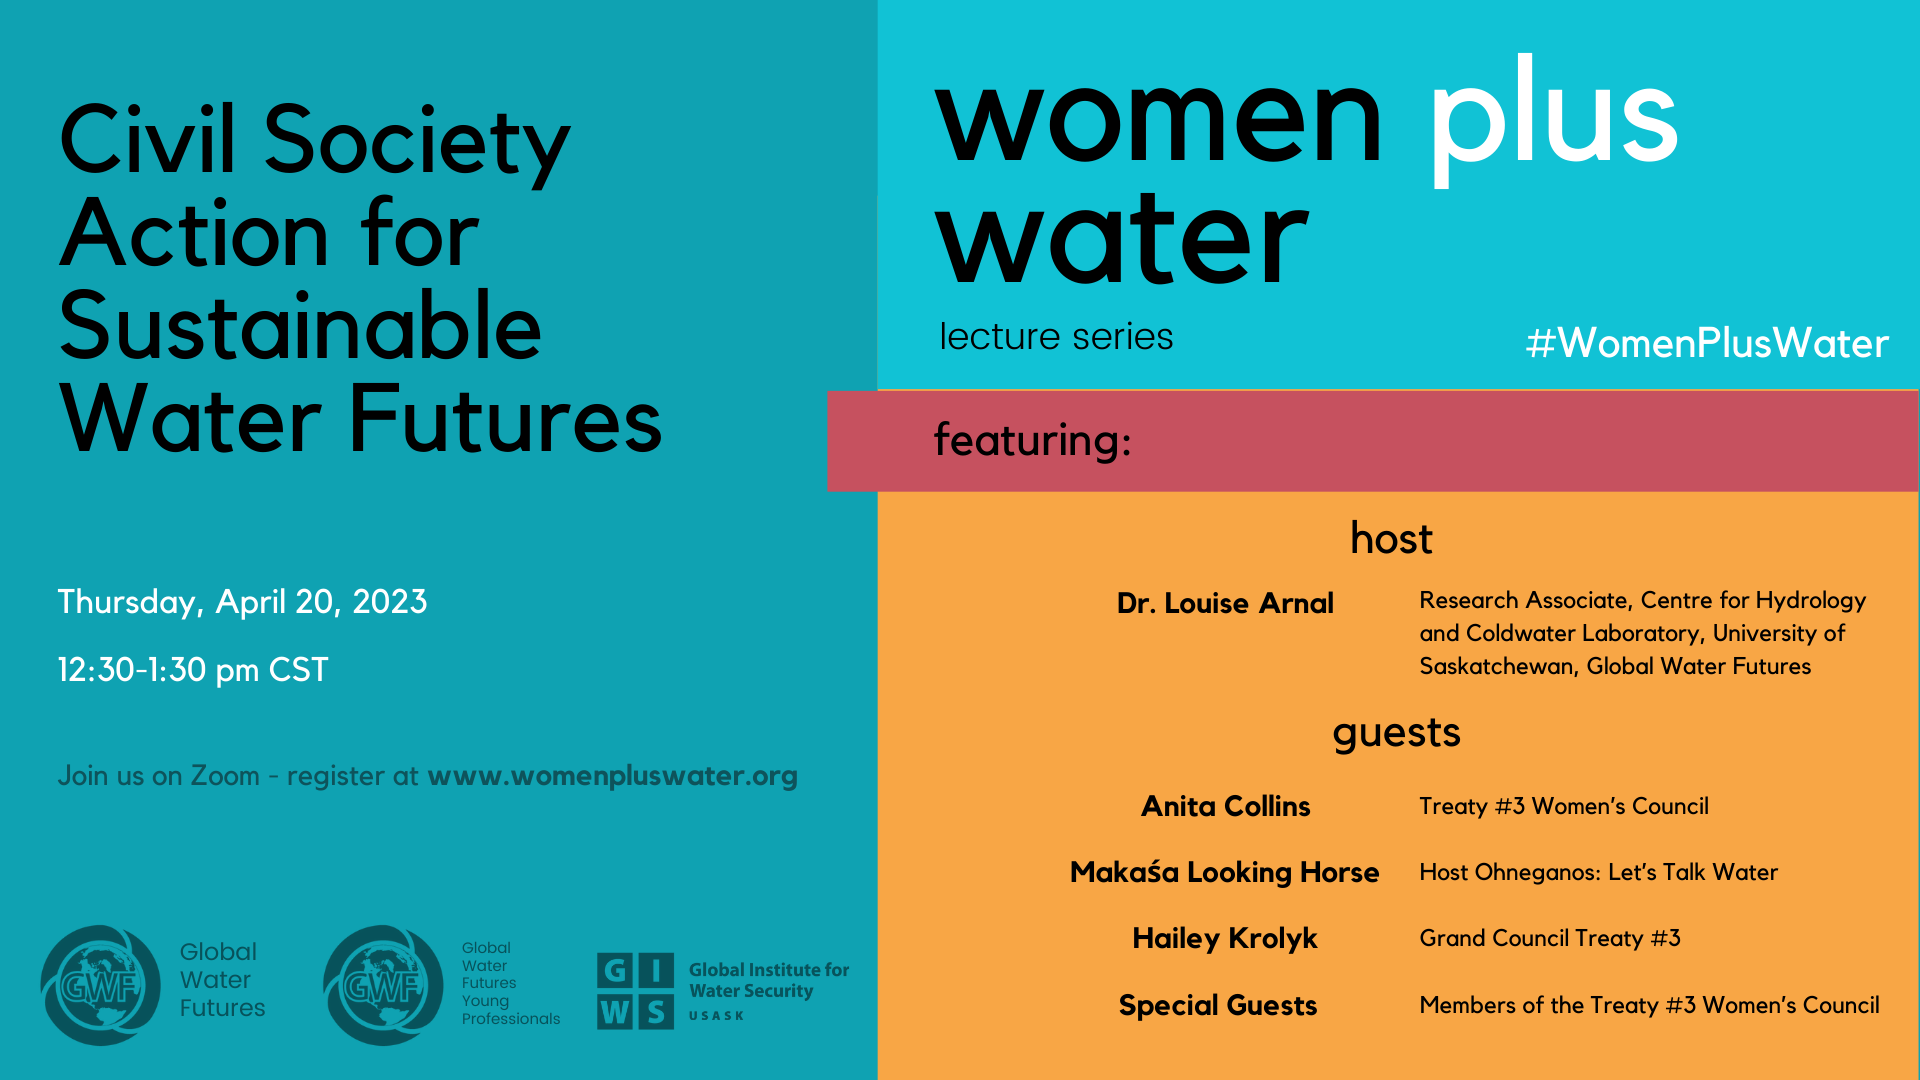 Women Plus Water Lecture - Civil Society Action for Sustainable Water Futures